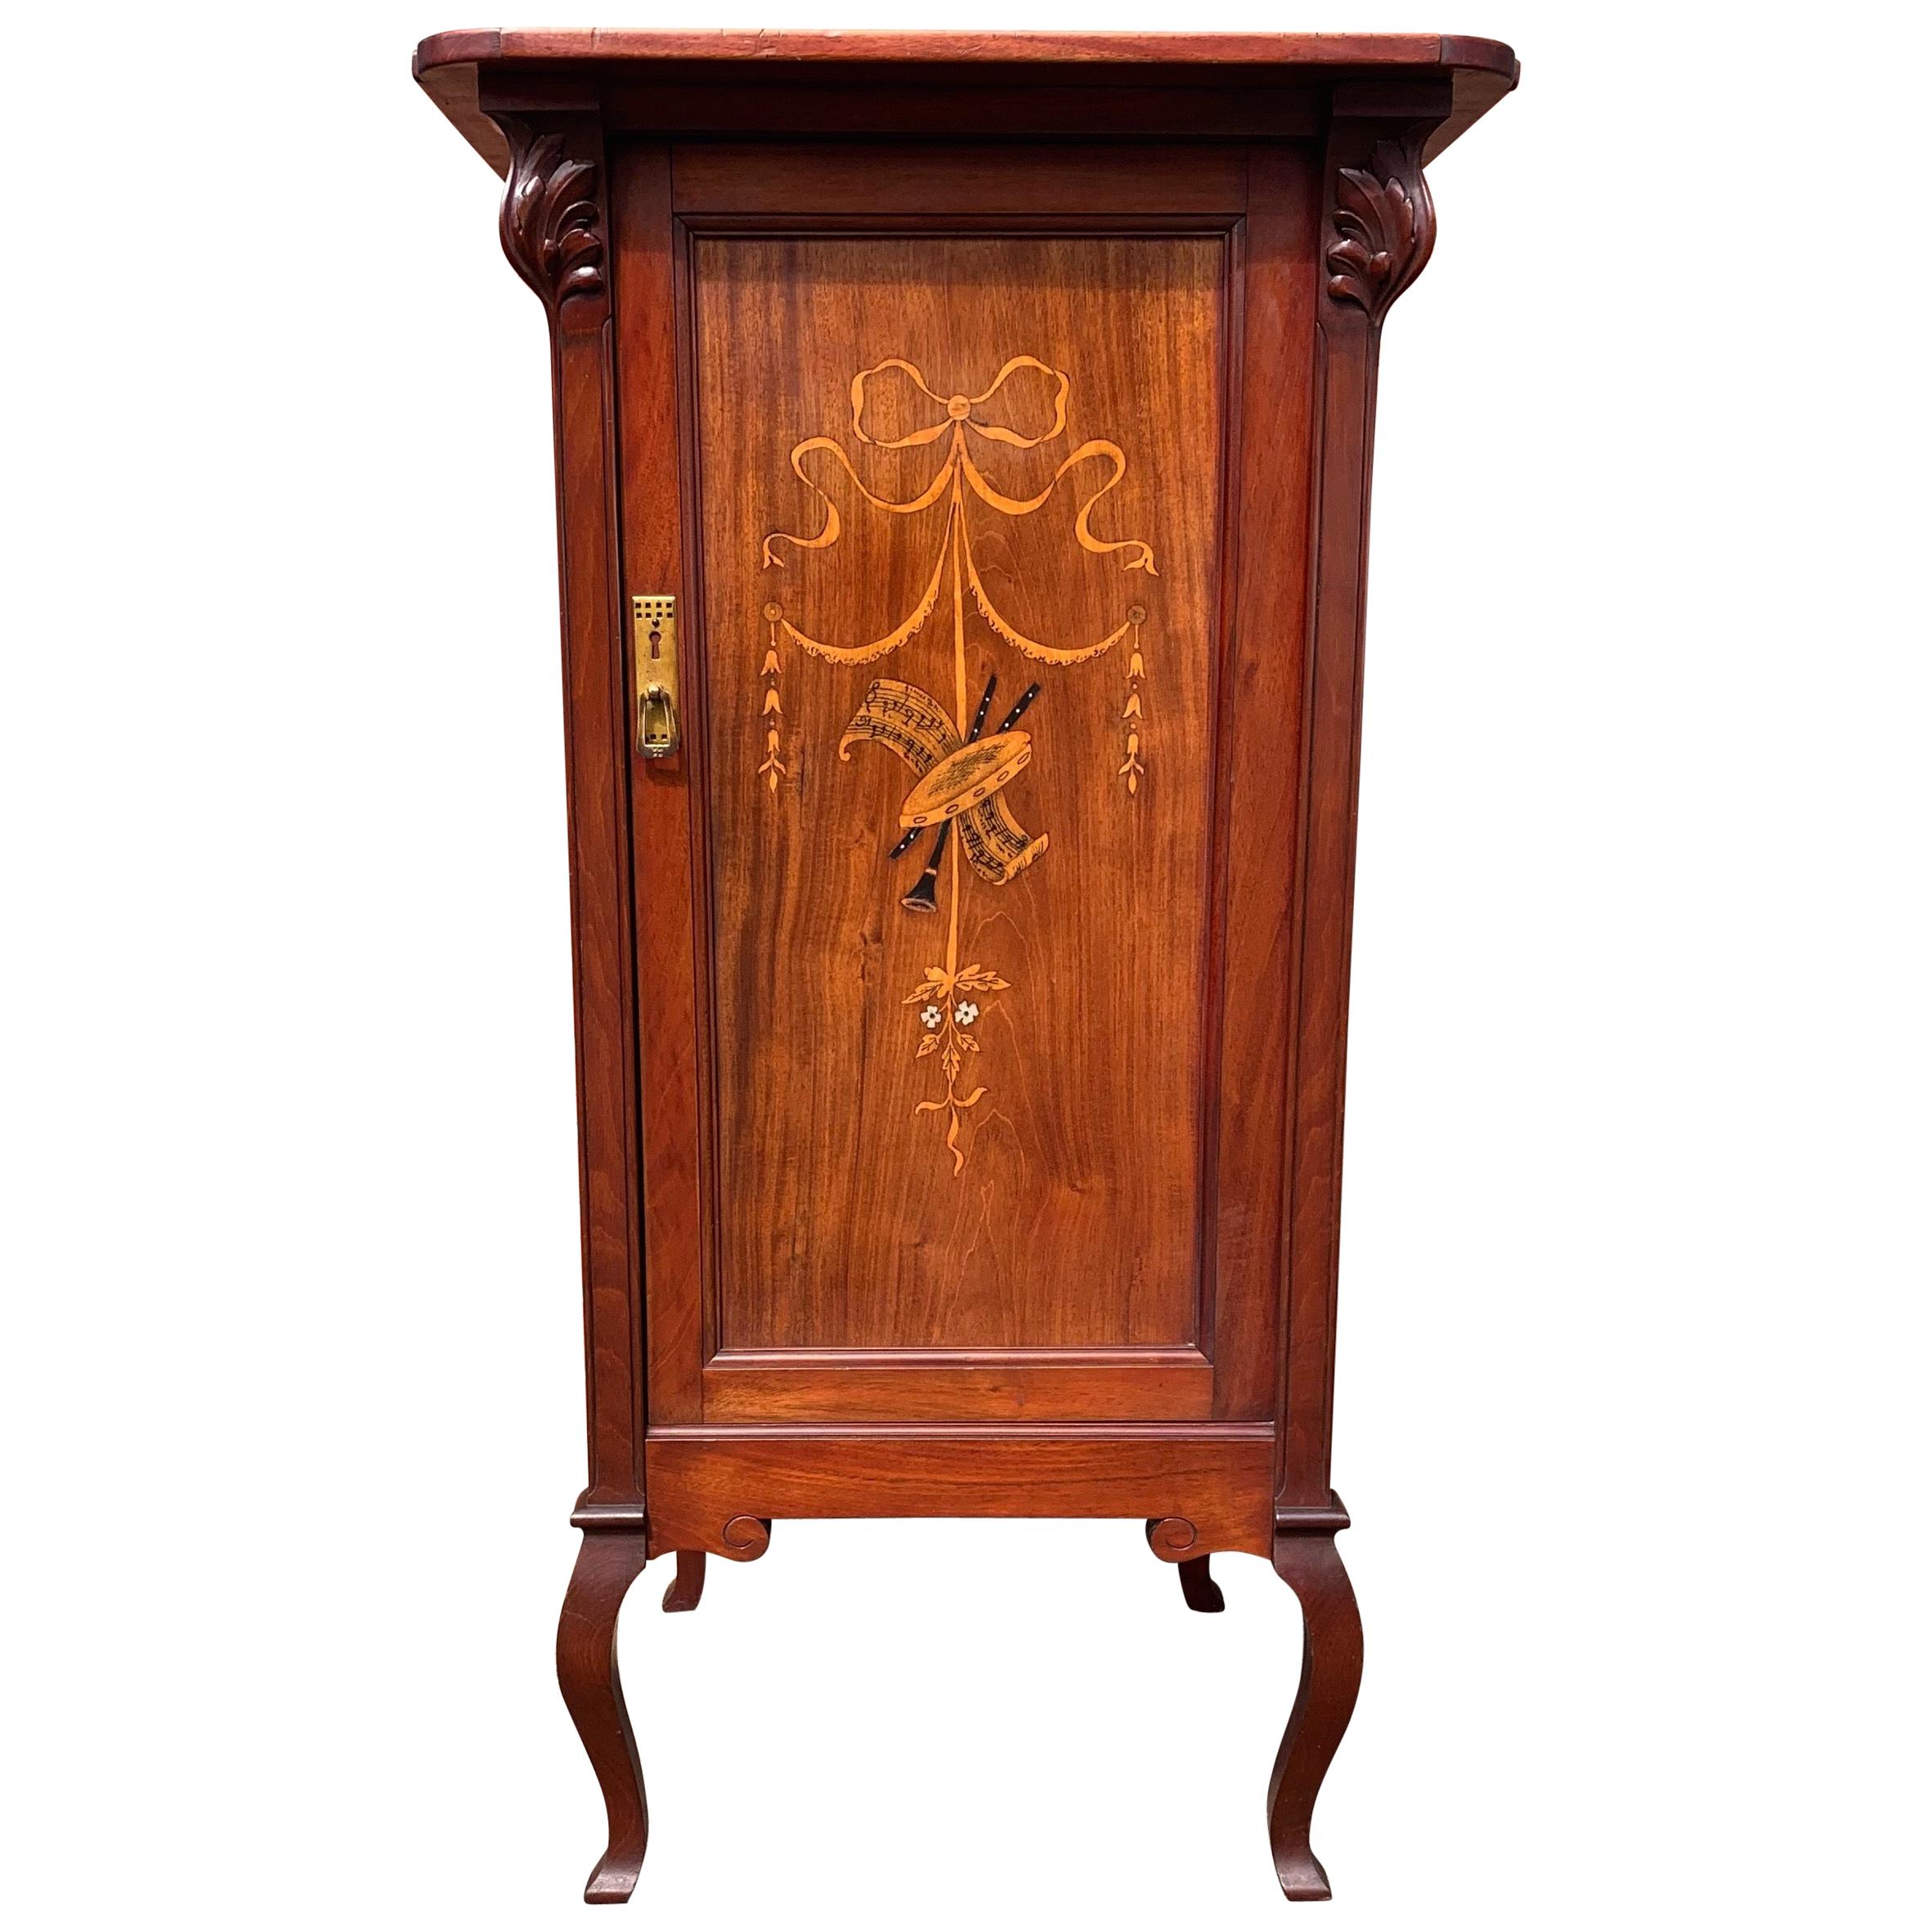 Beautiful & Practical Art Nouveau Style Cabinet with Inlaid Door & Five Drawers